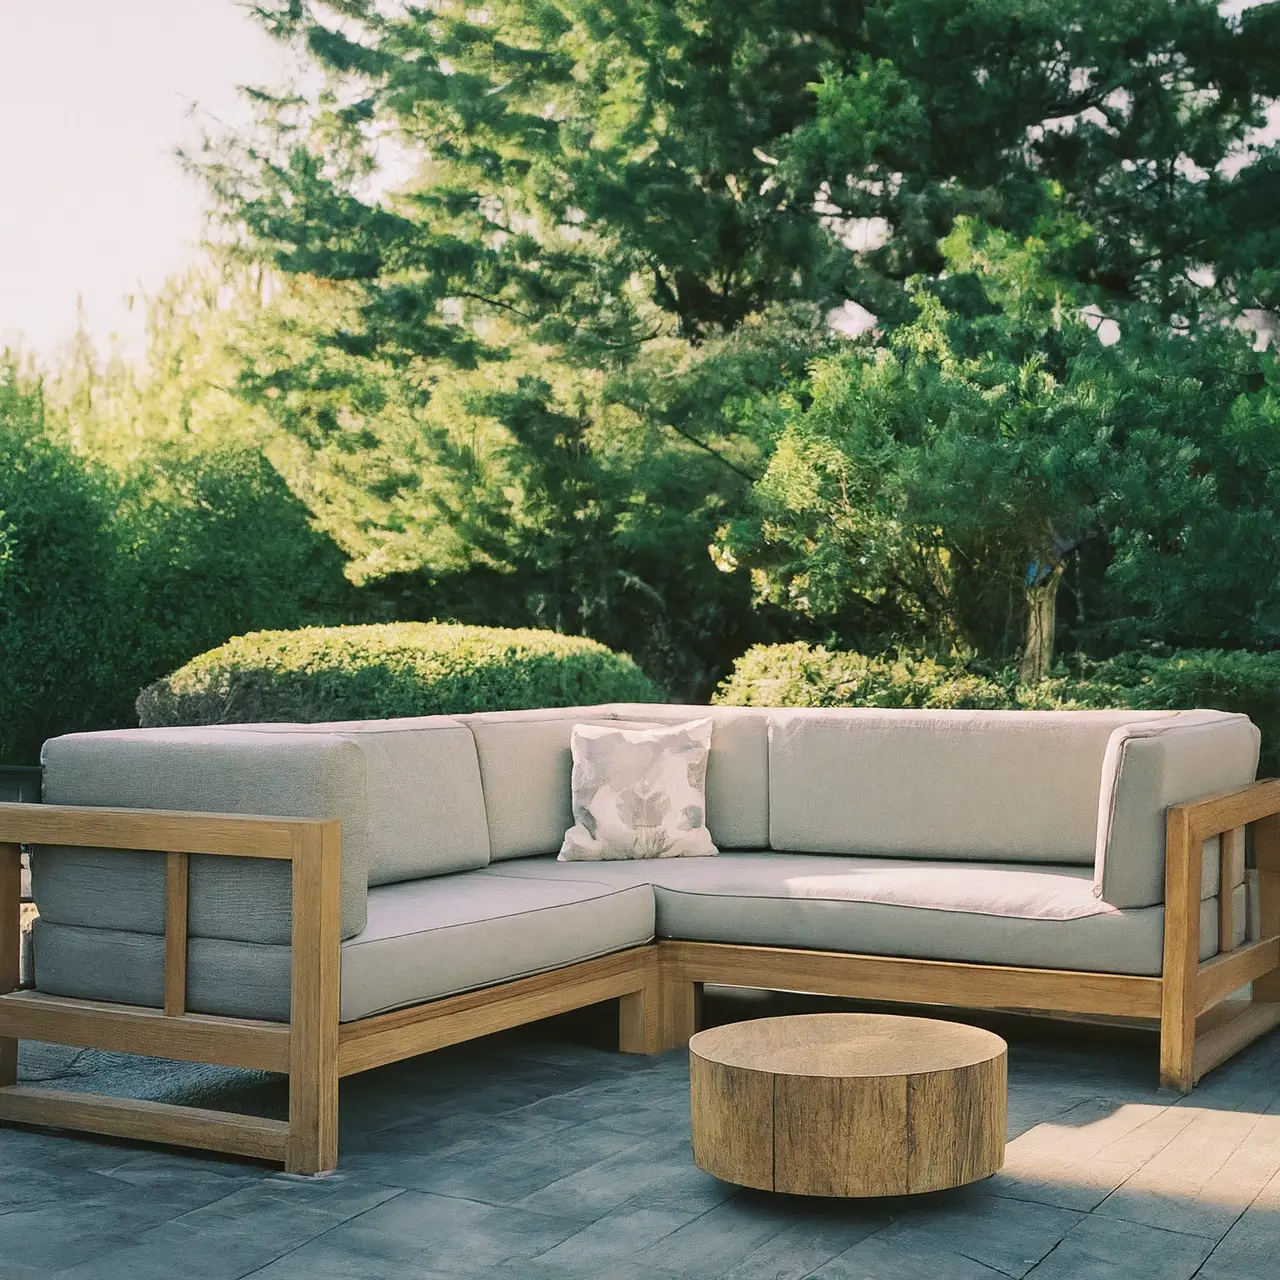 Luxurious outdoor sofa set on a beautifully landscaped patio. 35mm stock photo